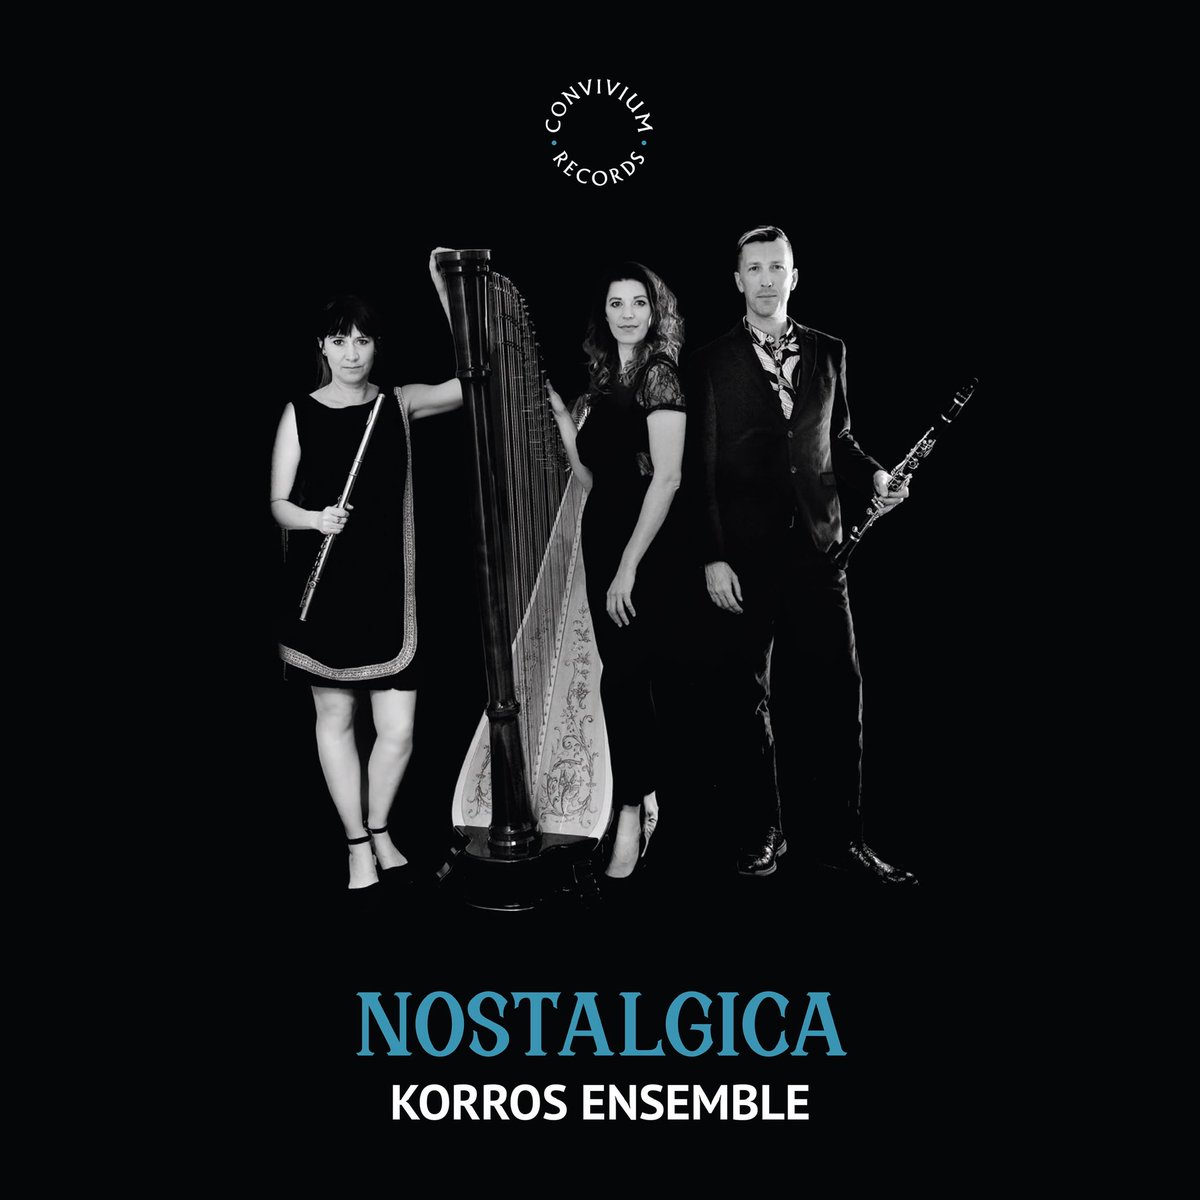 Three weeks today we are officially launching our new album NOSTALGICA with a concert at the intimate and beautiful venue @HoStBarnabas in Soho. With music from #ElizabethPoston @CatrinFinch @CherylHoad &more, we’d love to celebrate with you 5th Dec 7pm🎫 eventbrite.co.uk/e/korros-ensem…